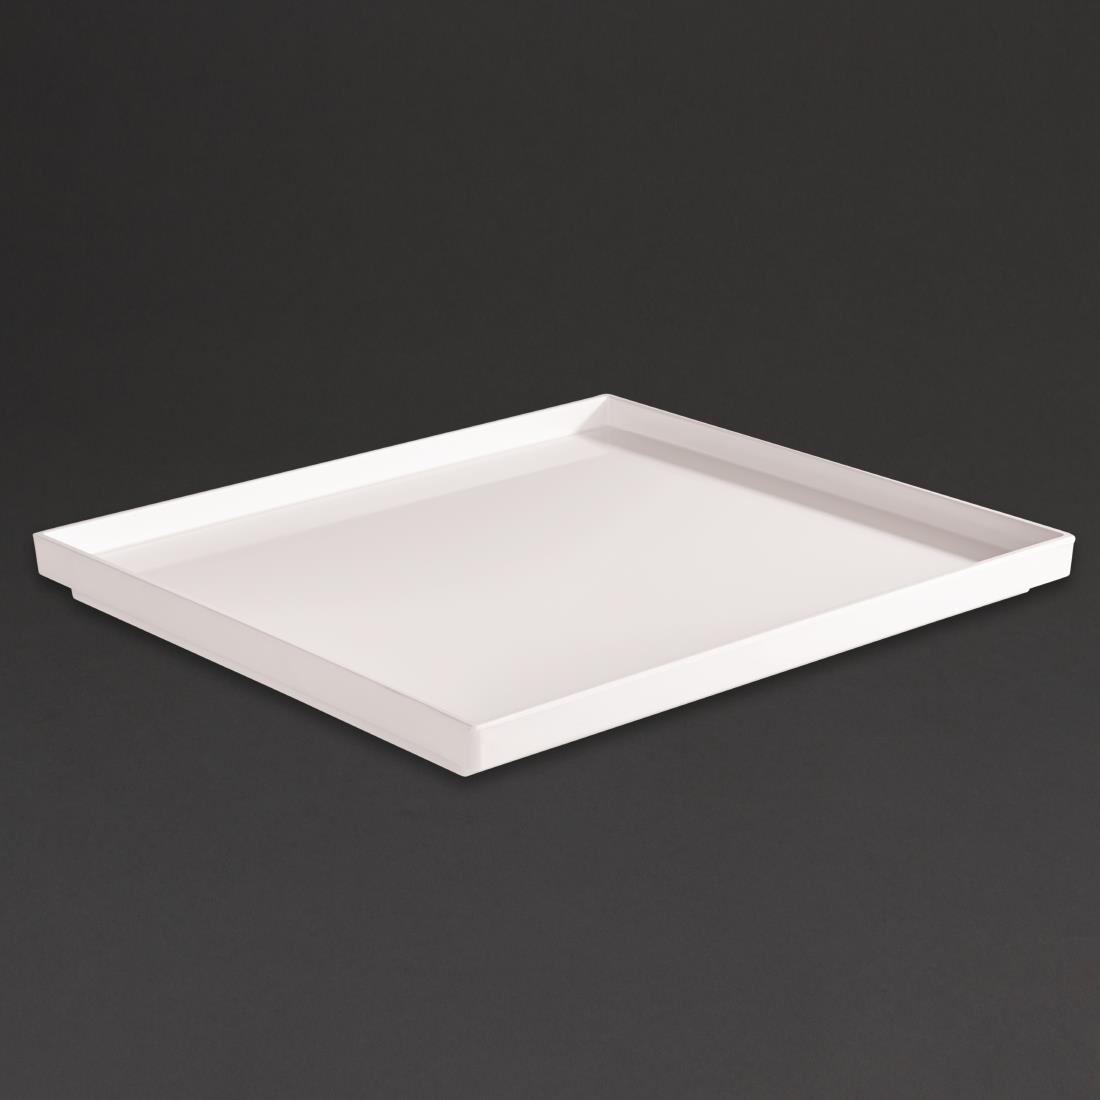 APS Asia+  White Tray GN 1/2 - Each - DT769 - 1